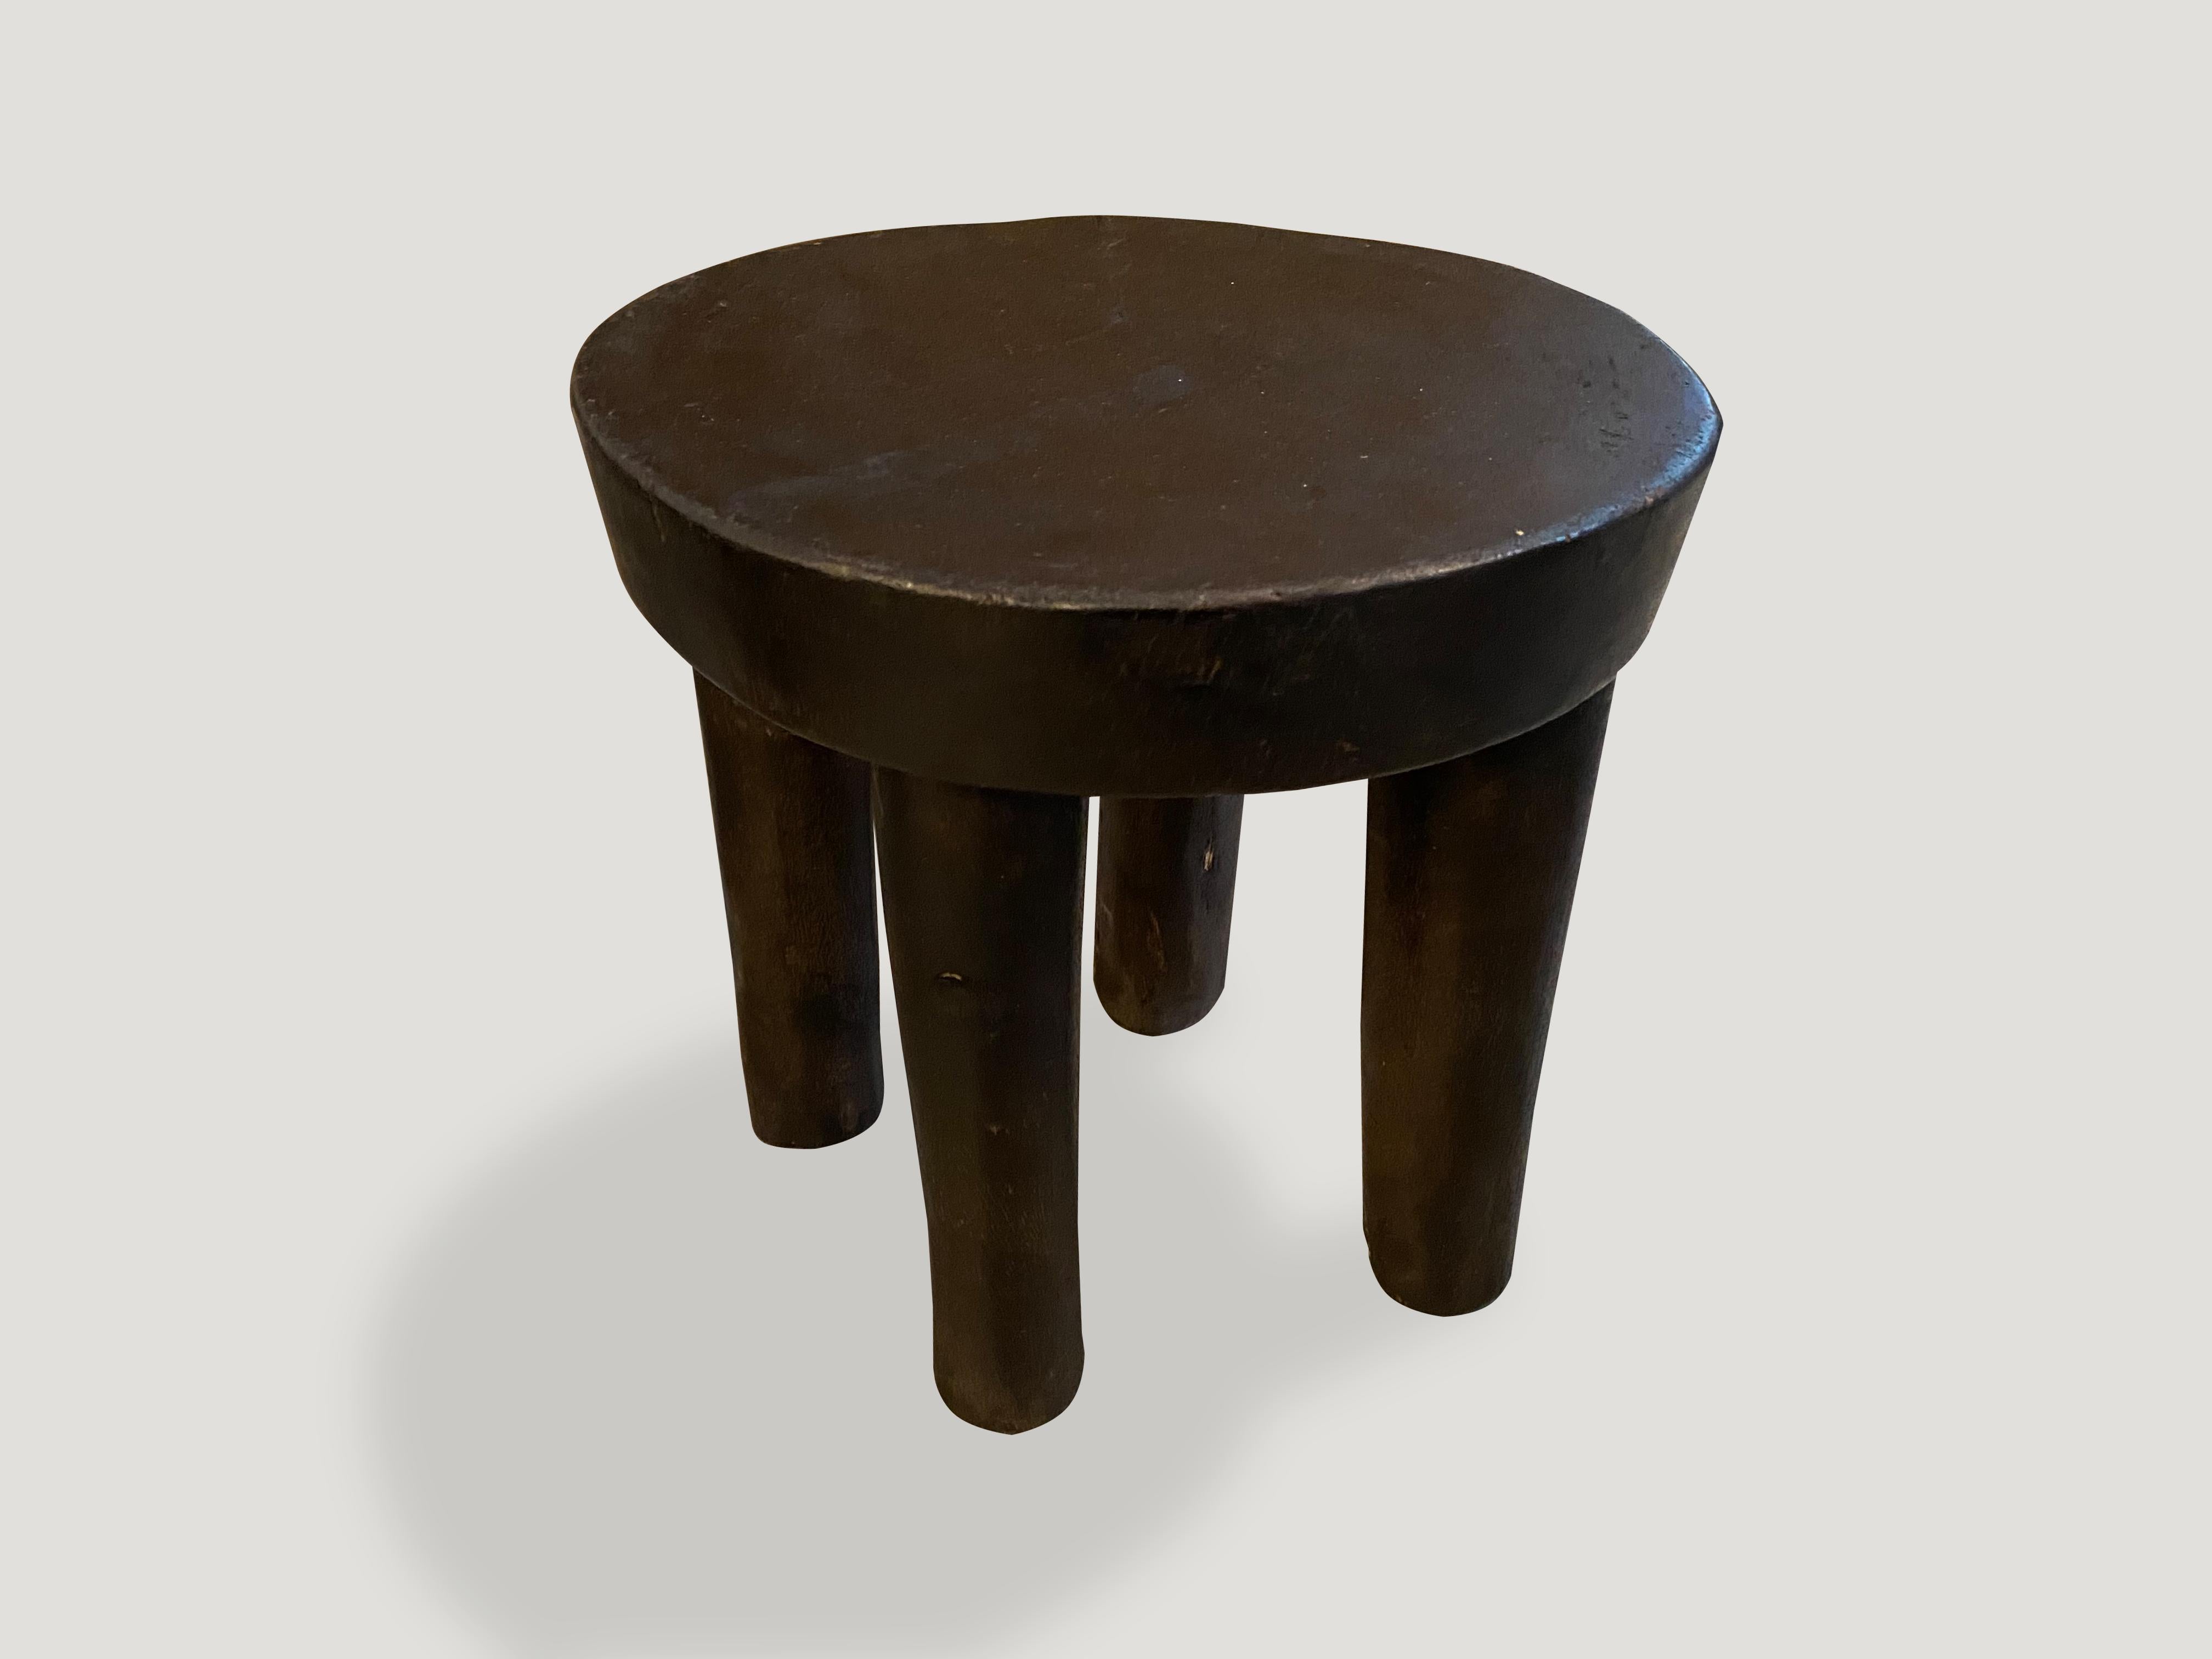 African side table or stool hand carved from a single piece of mahogany wood.

This side table or stool was sourced in the spirit of wabi-sabi, a Japanese philosophy that beauty can be found in imperfection and impermanence. It is a beauty of